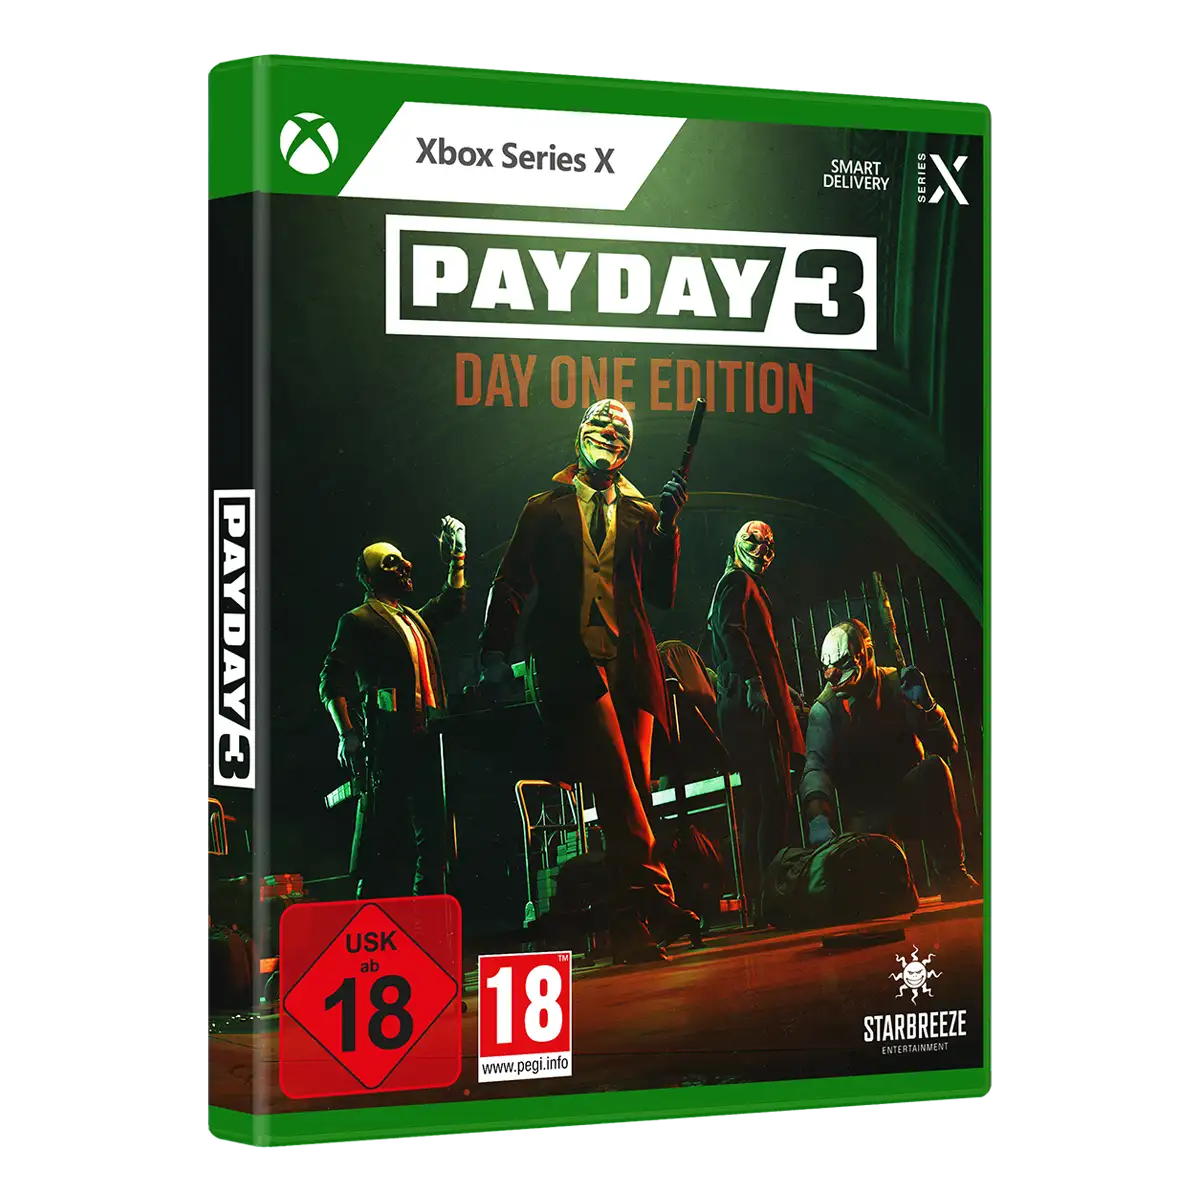 PAYDAY 3 Day One Edition (Xbox Series X) Image 2